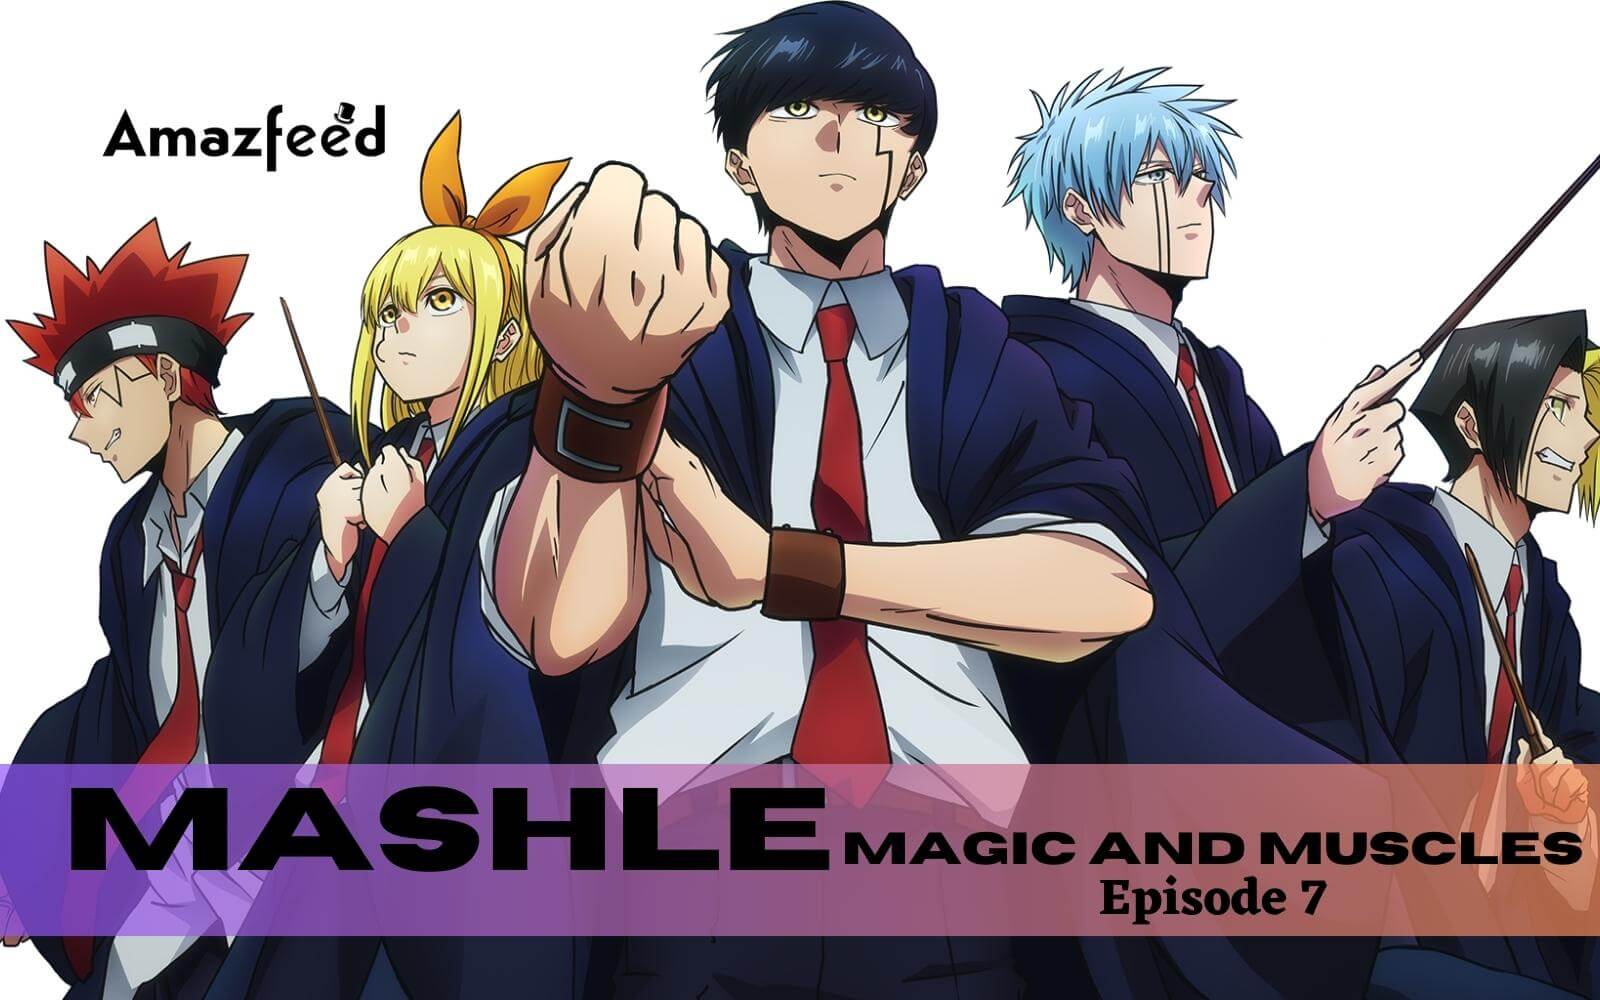 Mashle: Magic and Muscles Episode 7 Release Date & Time